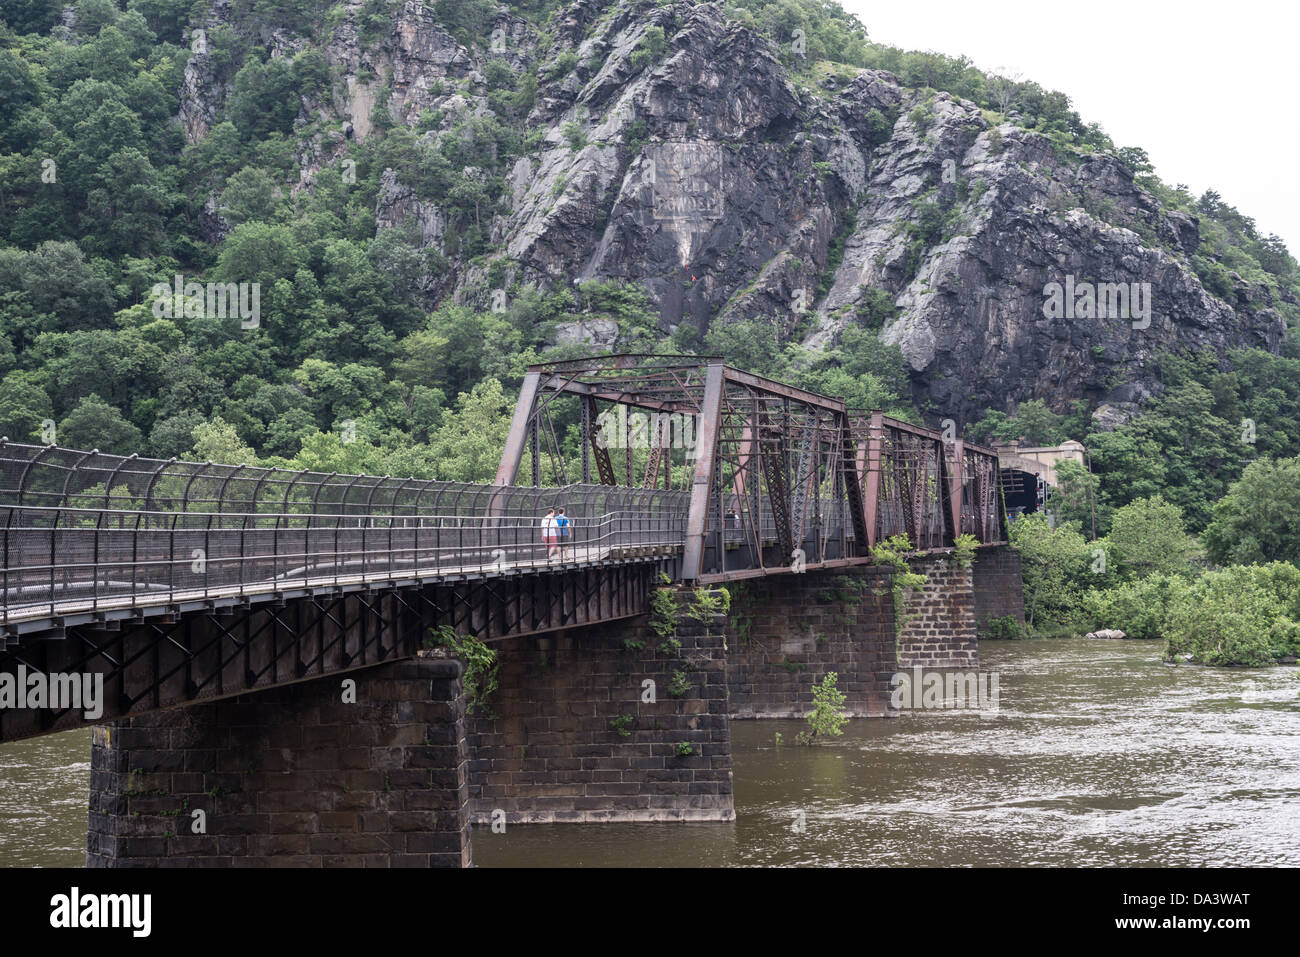 HARPERS FERRY, West Virginia - A bridge crossing the Potomac with the old CSX railway tracks in Harpers Ferry, West Virginia, looking east into Virginia. Stock Photo